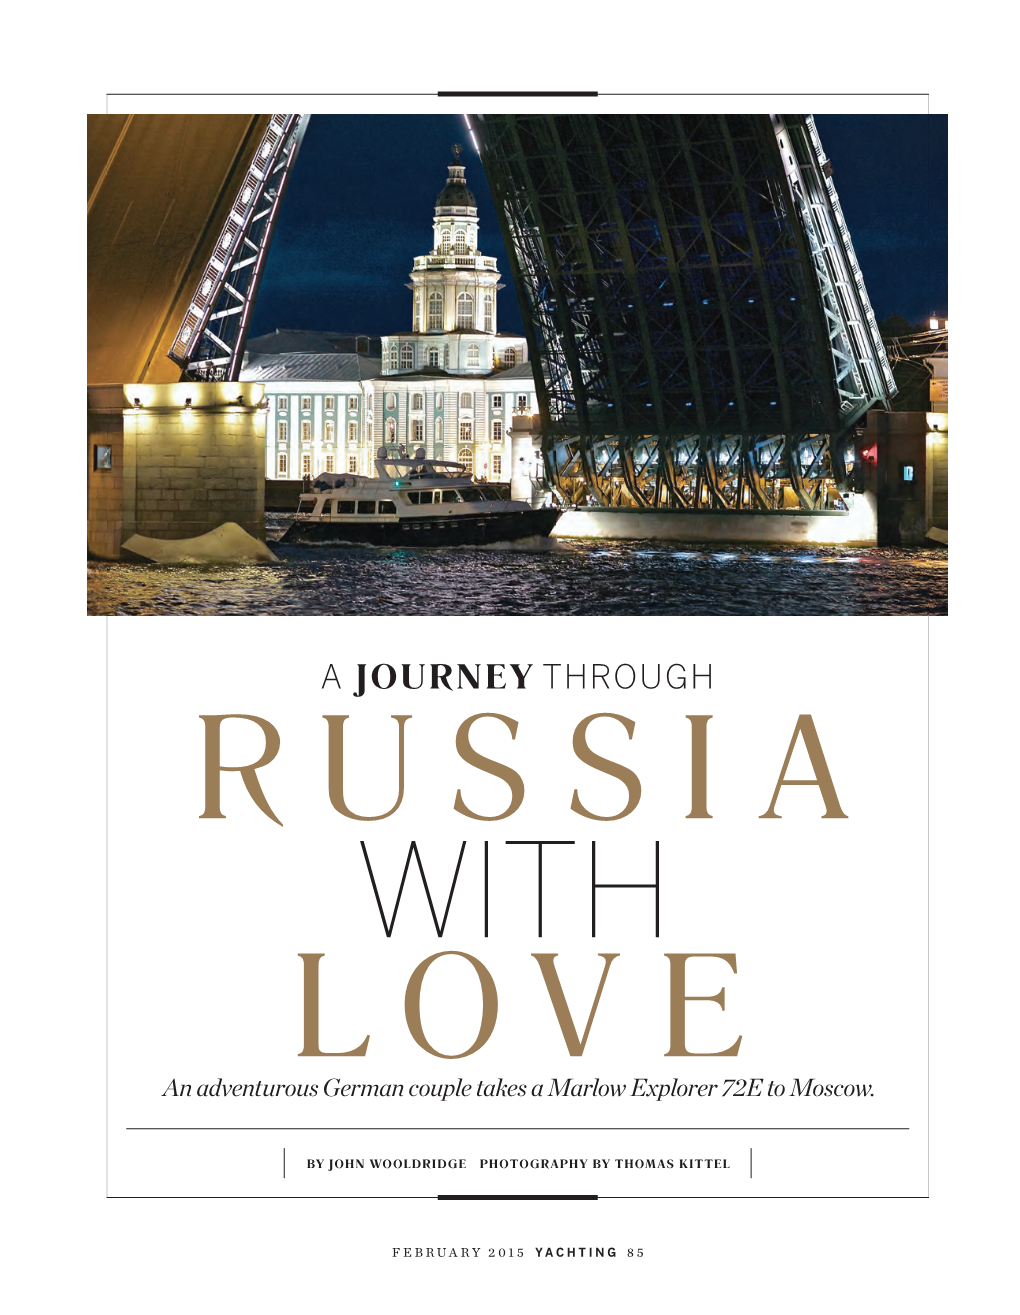 A JOURNEY THROUGH RUSSIA with LOVE an Adventurous German Couple Takes a Marlow Explorer 72E to Moscow